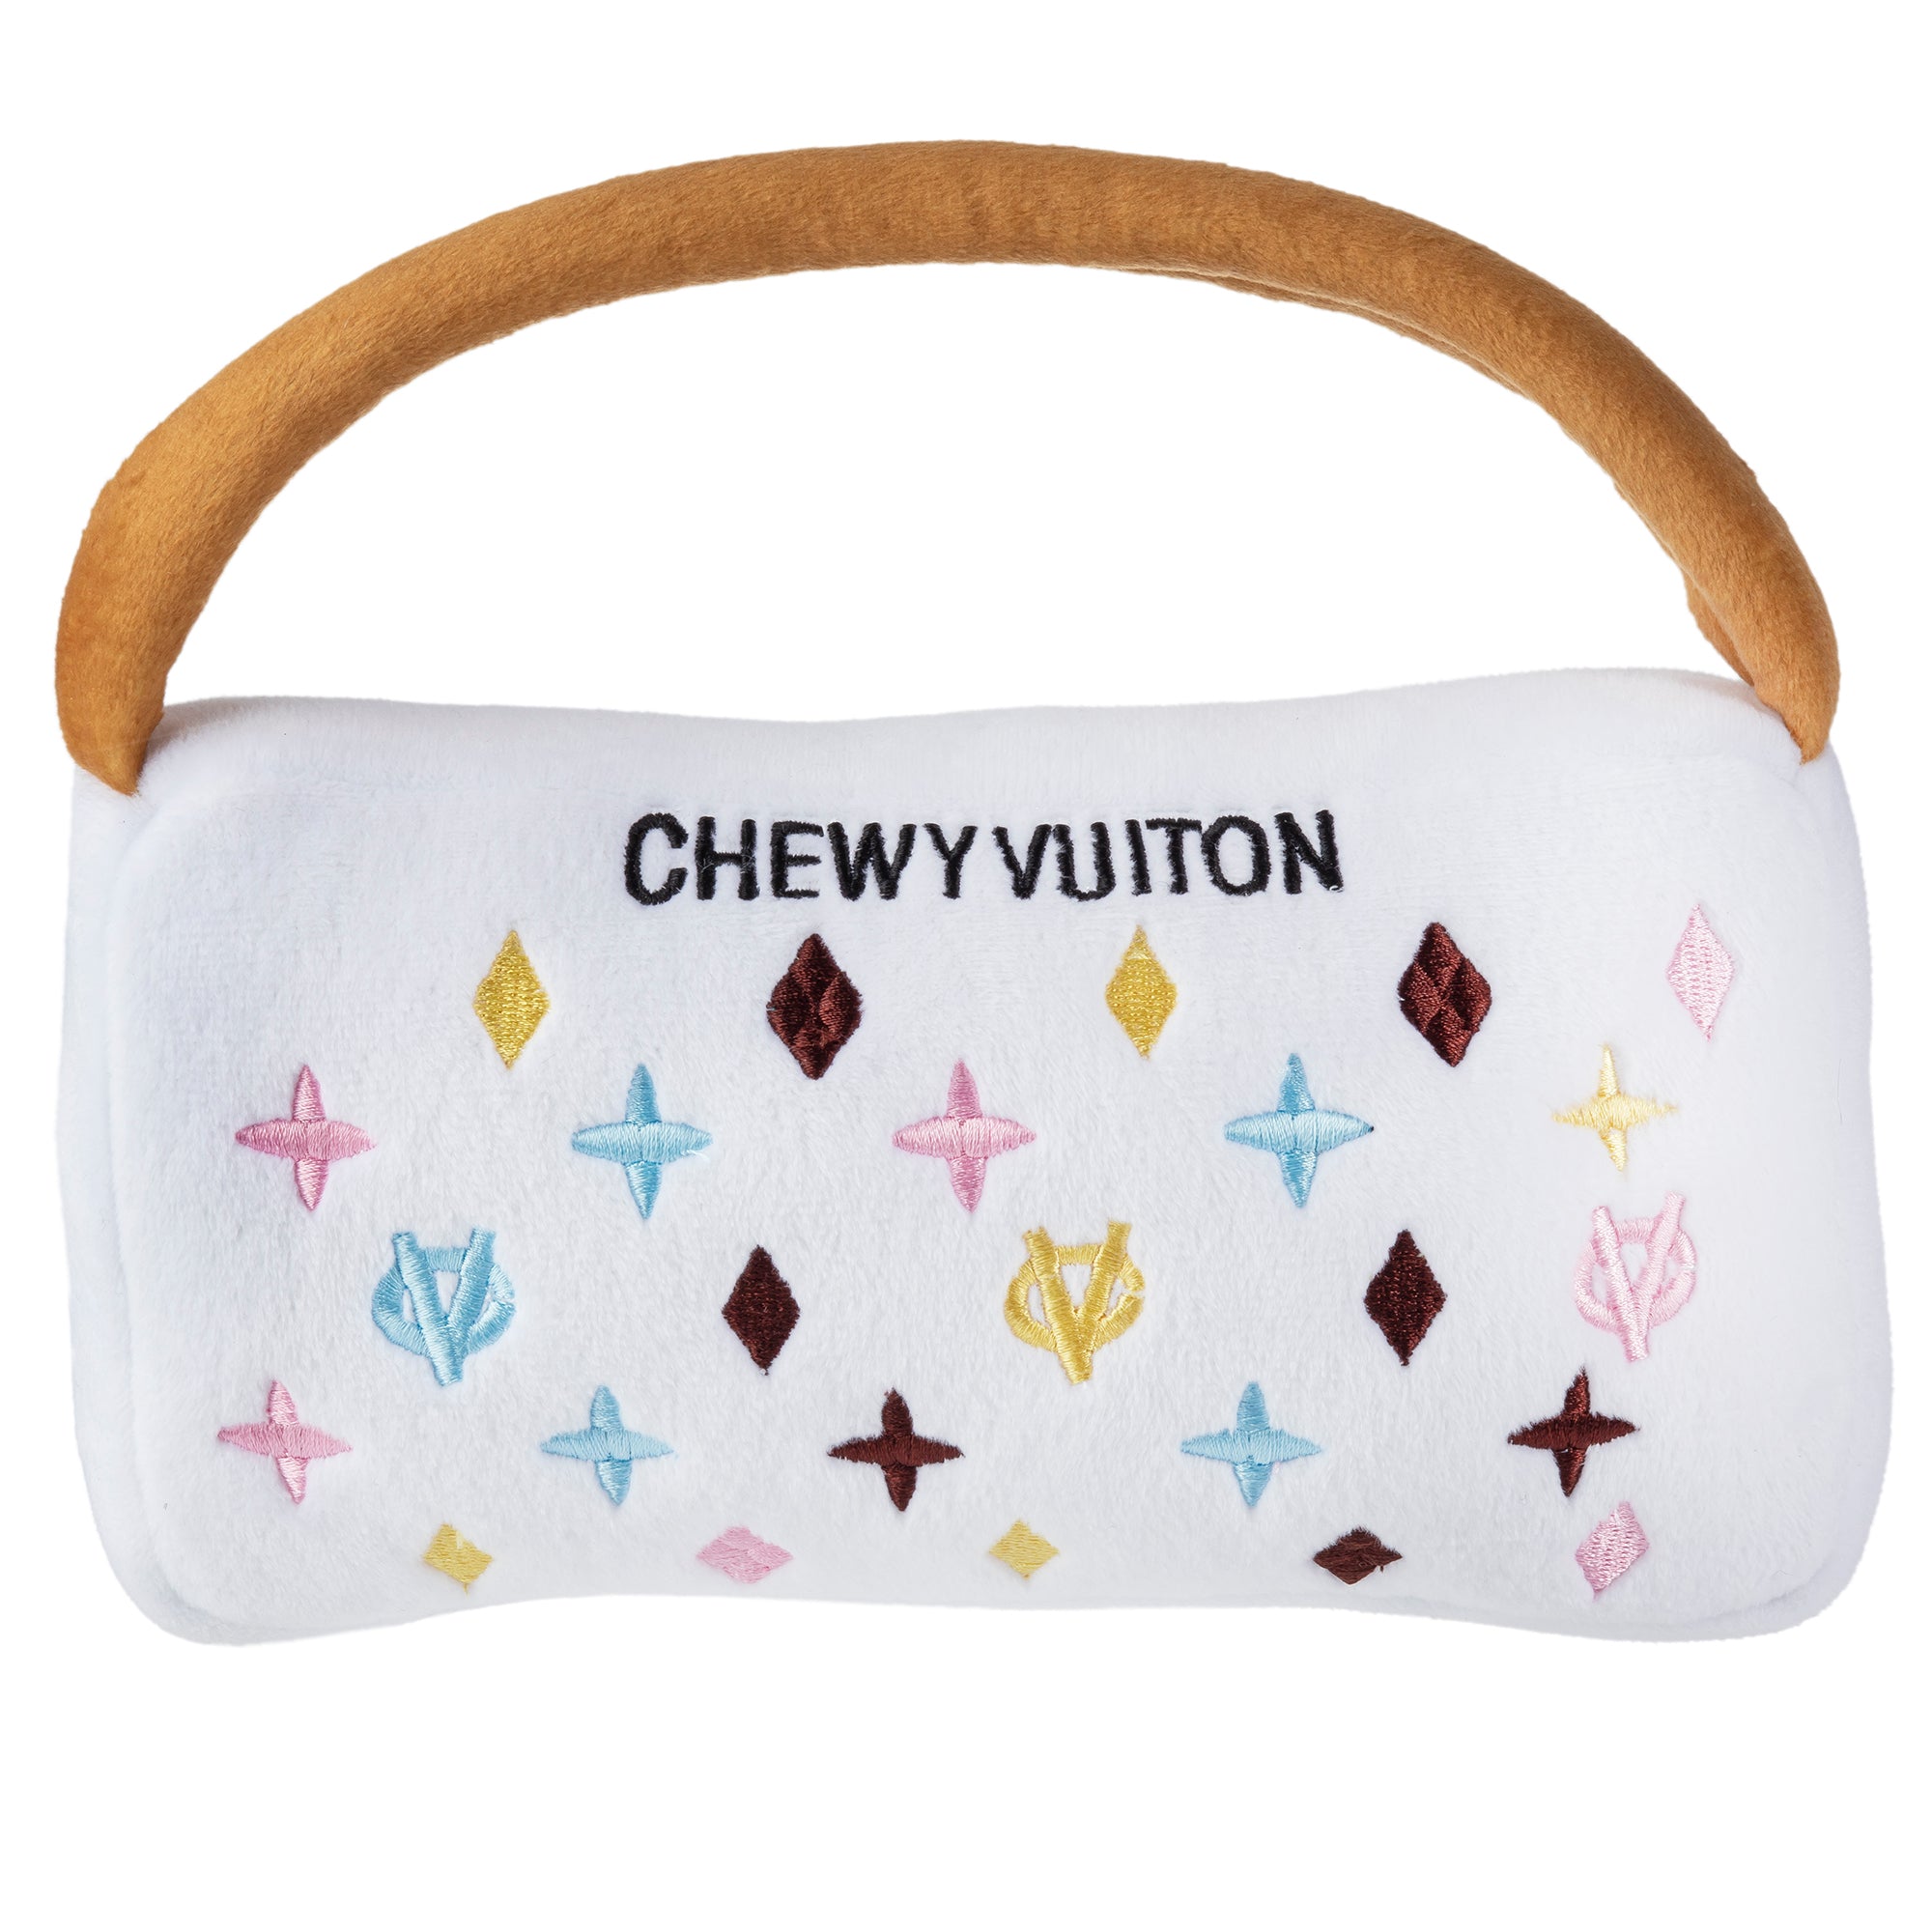 Chewy Vuiton White Bag Dog Toy – Coco & Pud